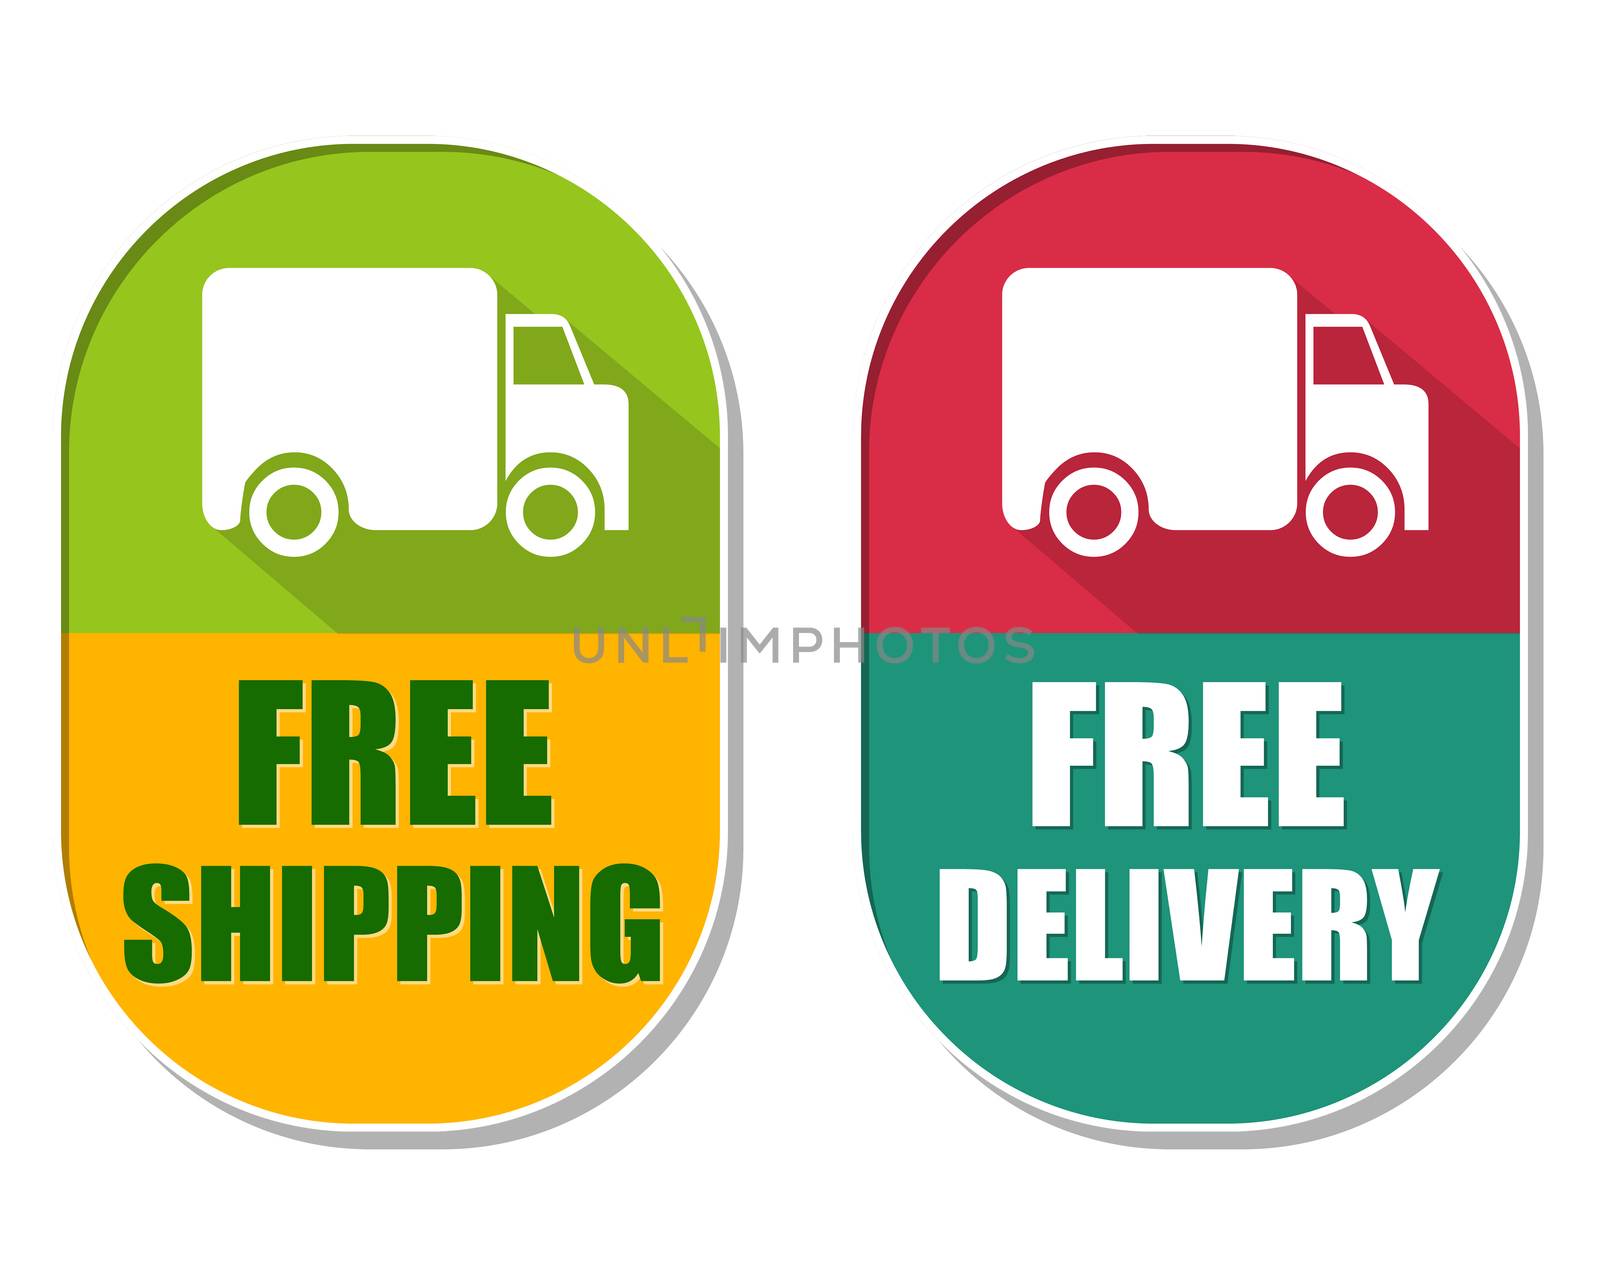 free shipping and delivery with truck sign, two elliptical label by marinini